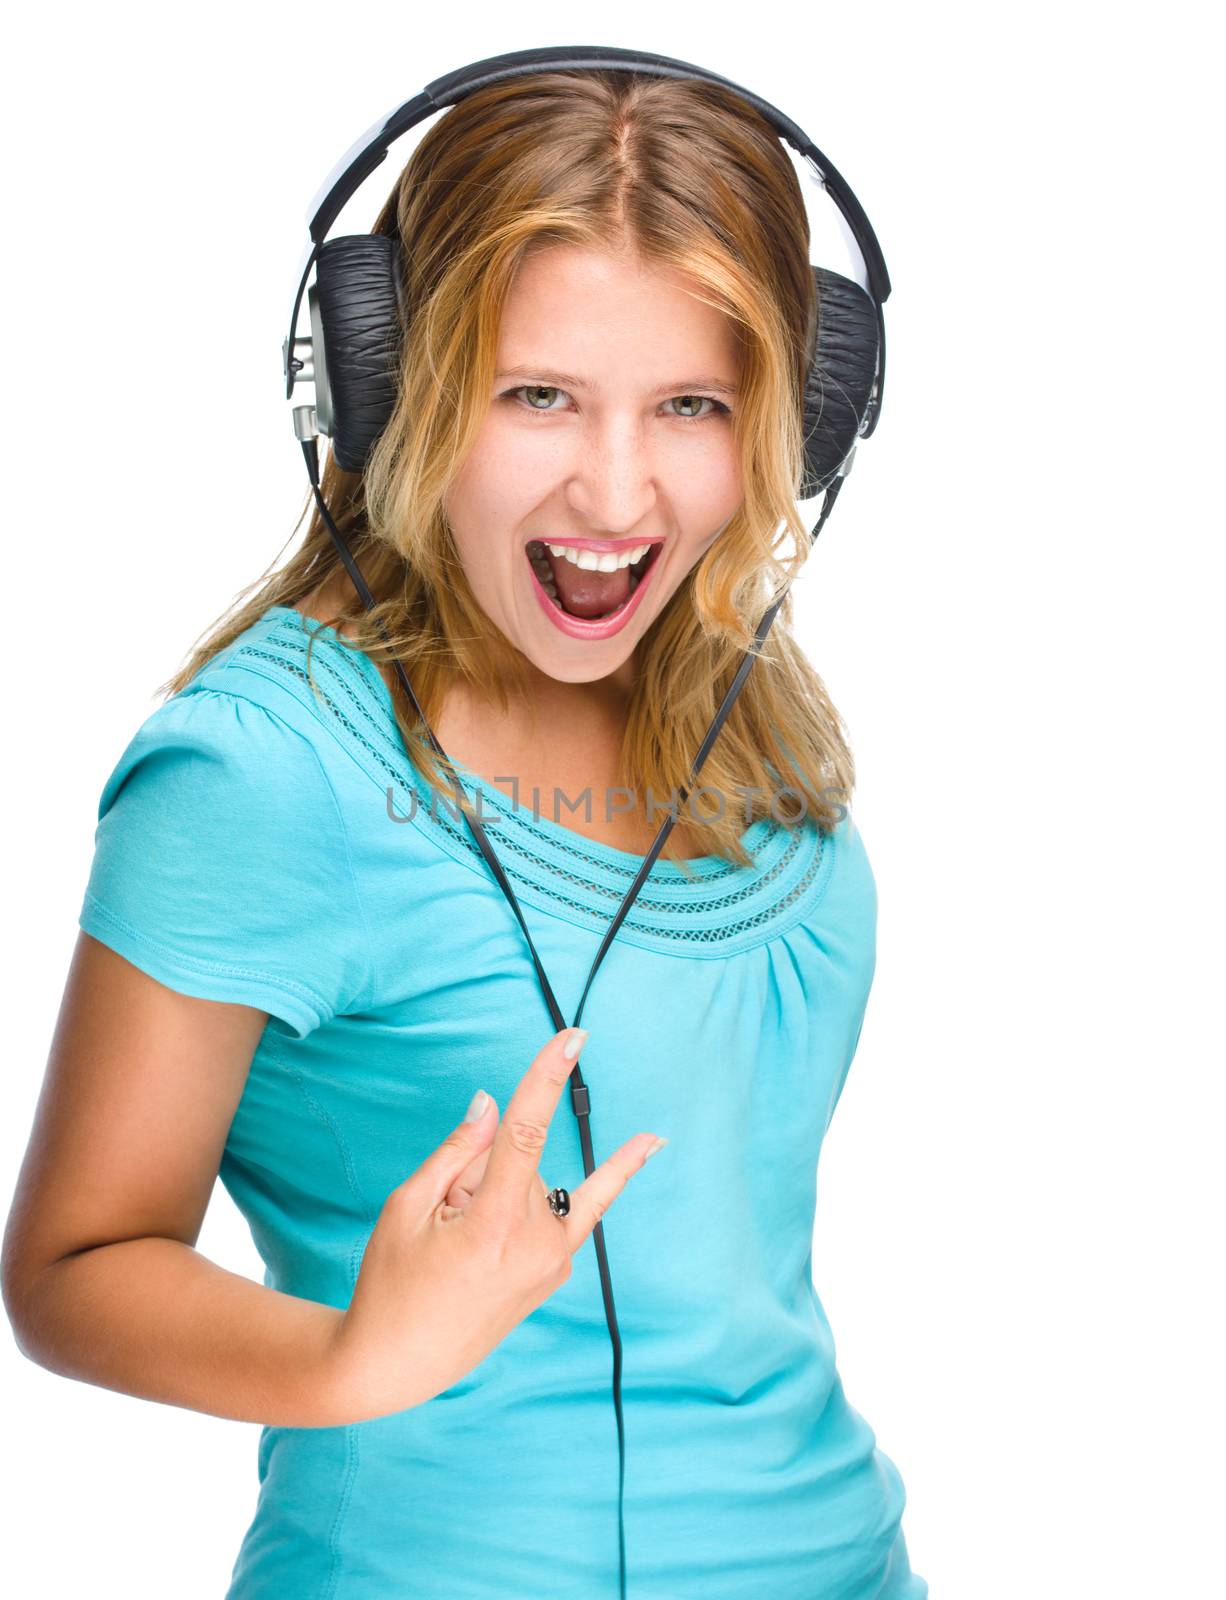 Beautiful girl with headphones show rock symbol isolated on a white background